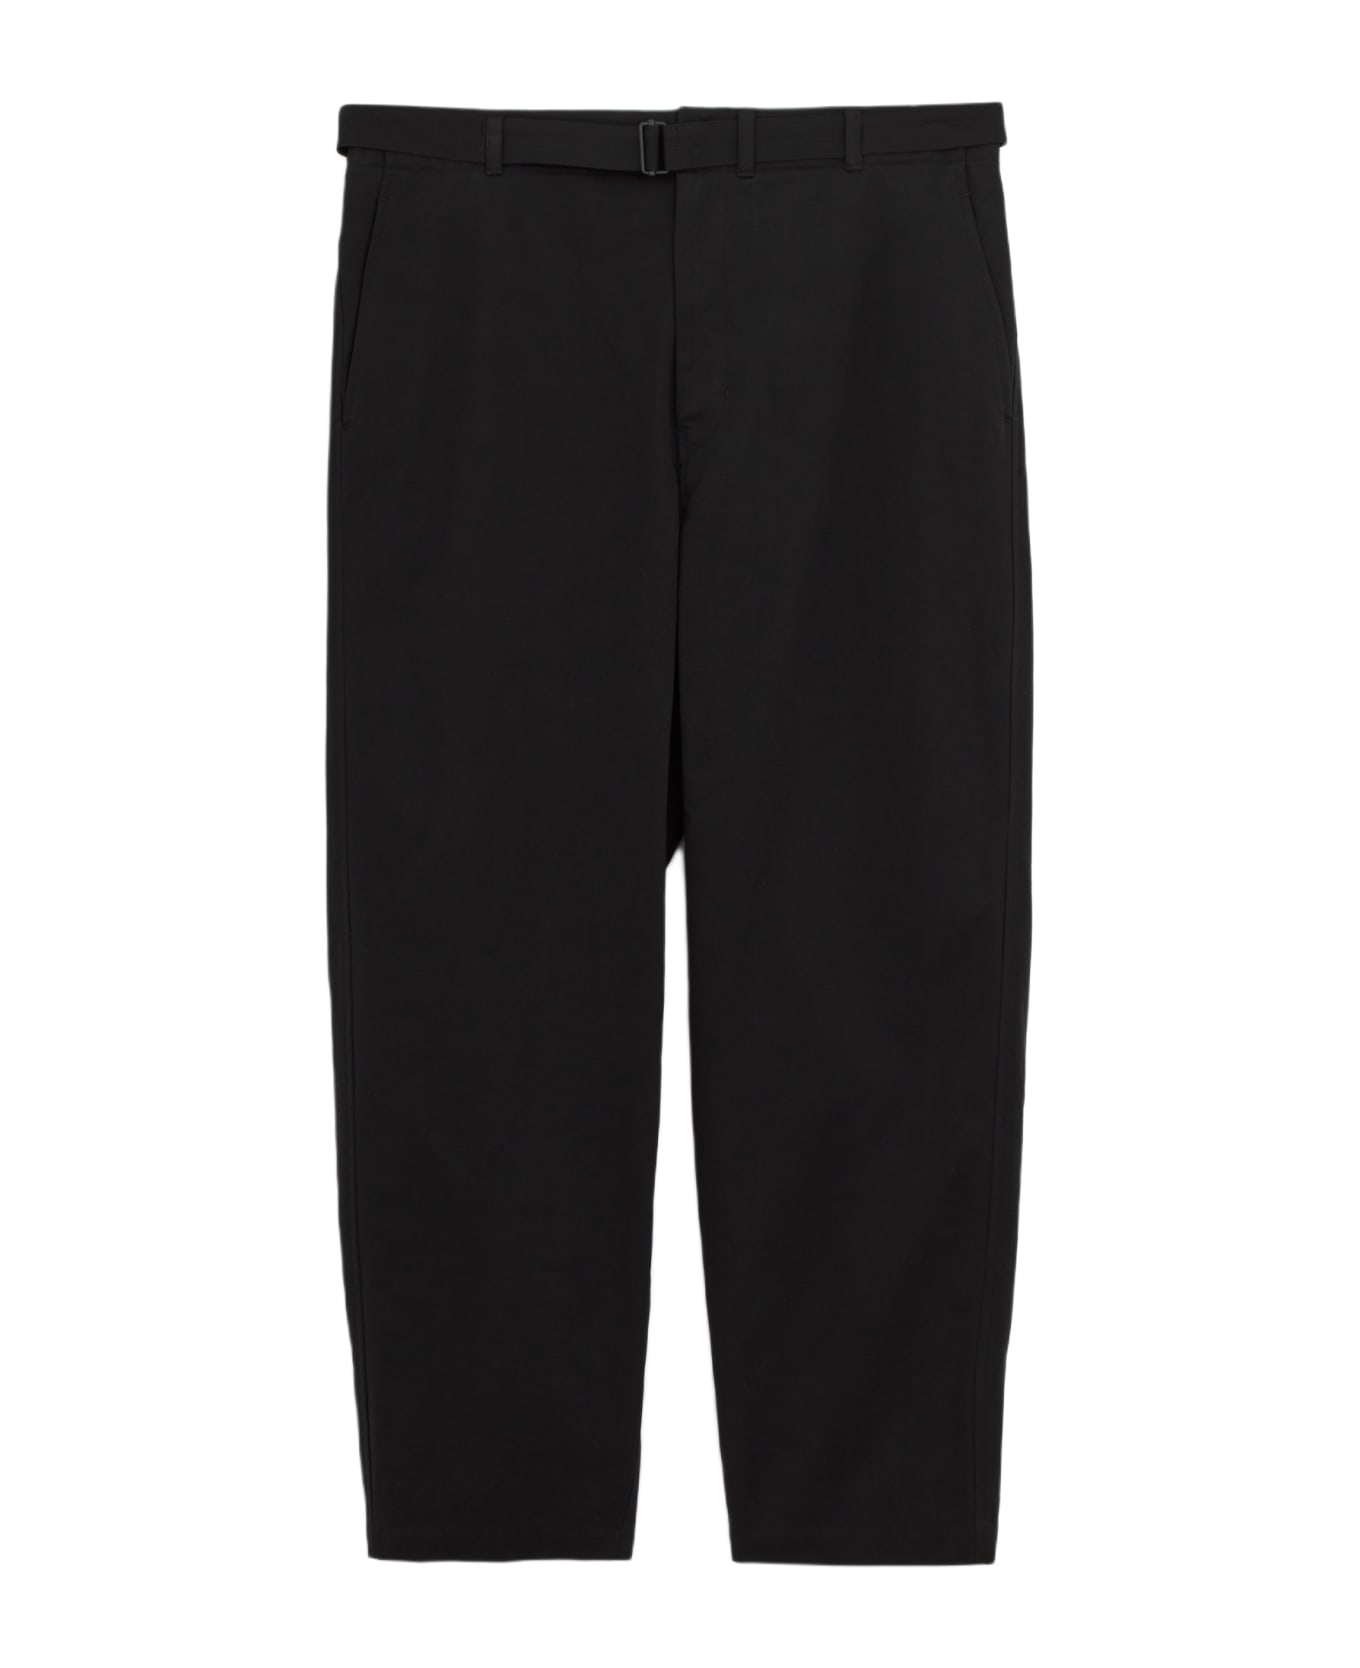 Lemaire Belted Carrot Pants - black ボトムス